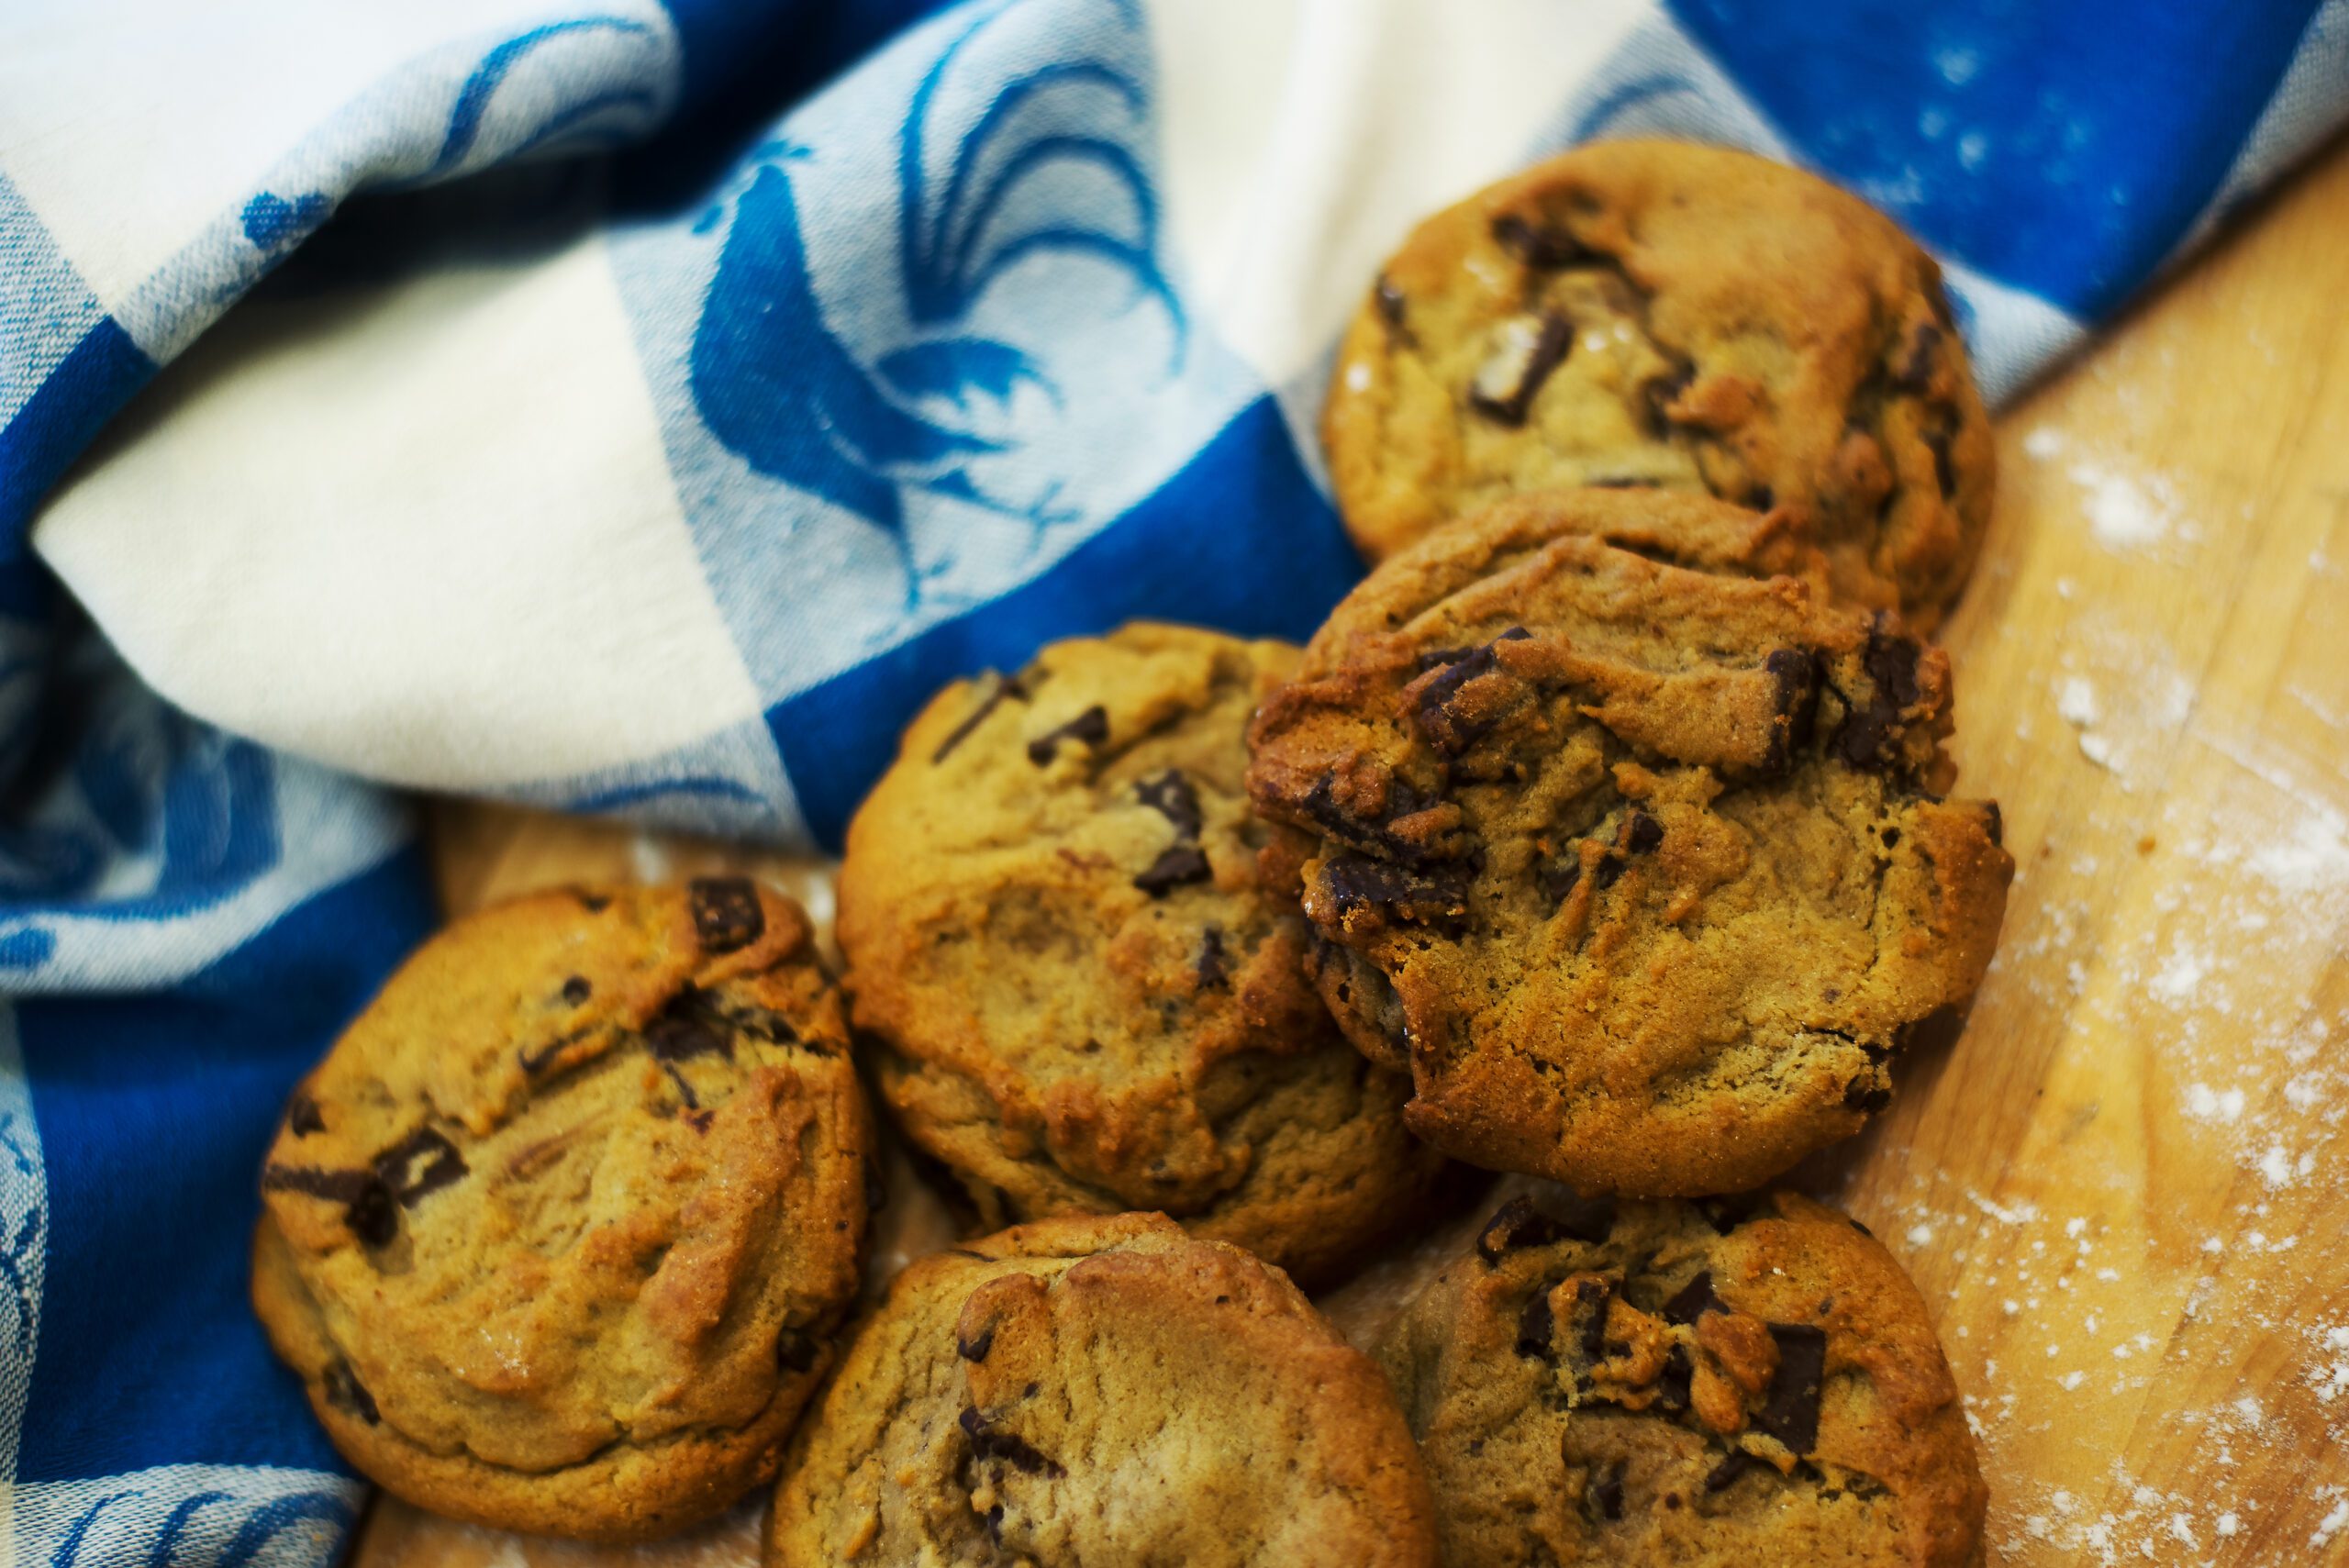 A picture of fresh baked chocolate chip cookies on a blue and white patterned table cloth